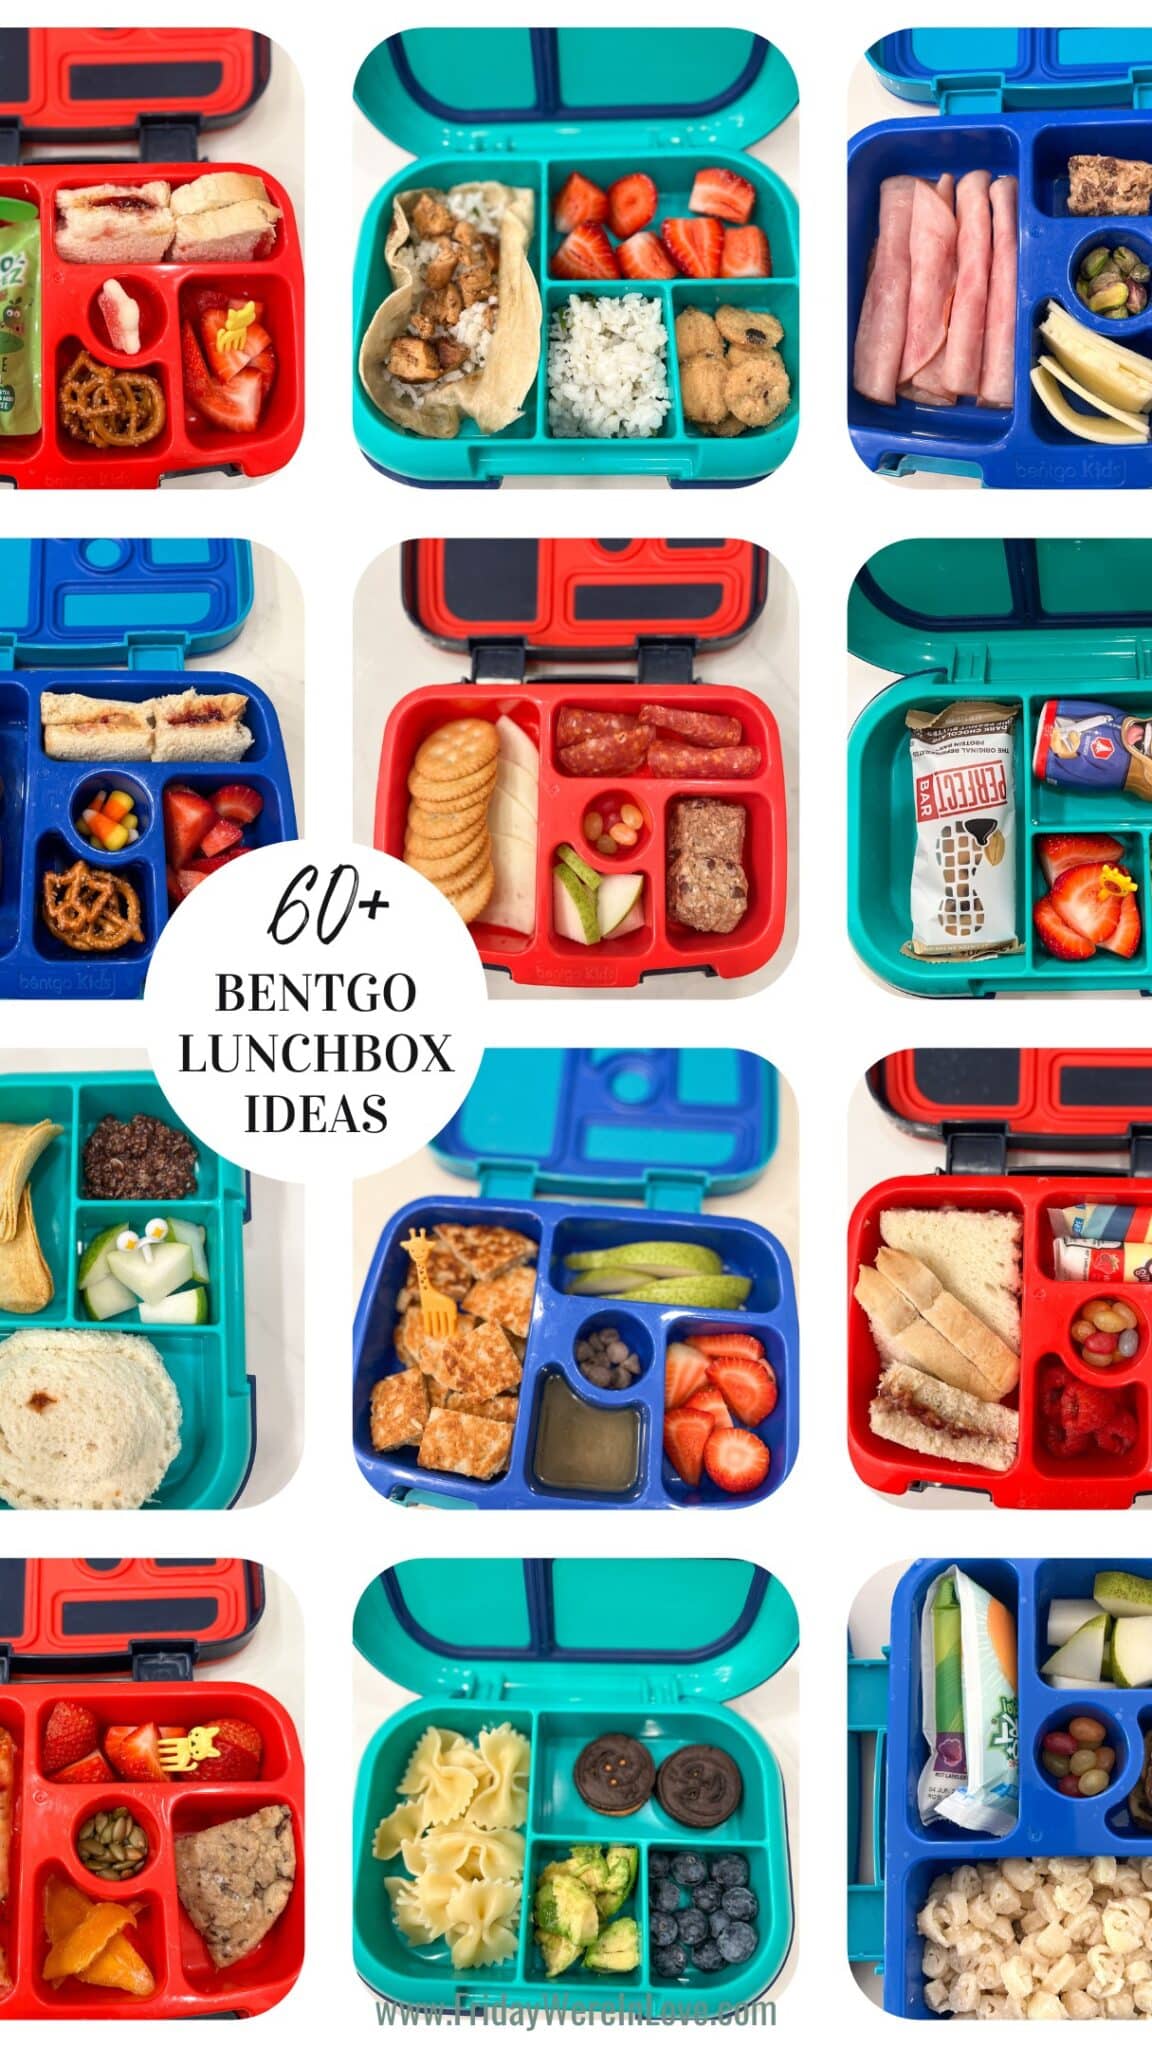 60 Bentgo Box Lunch Ideas - Friday We're In Love